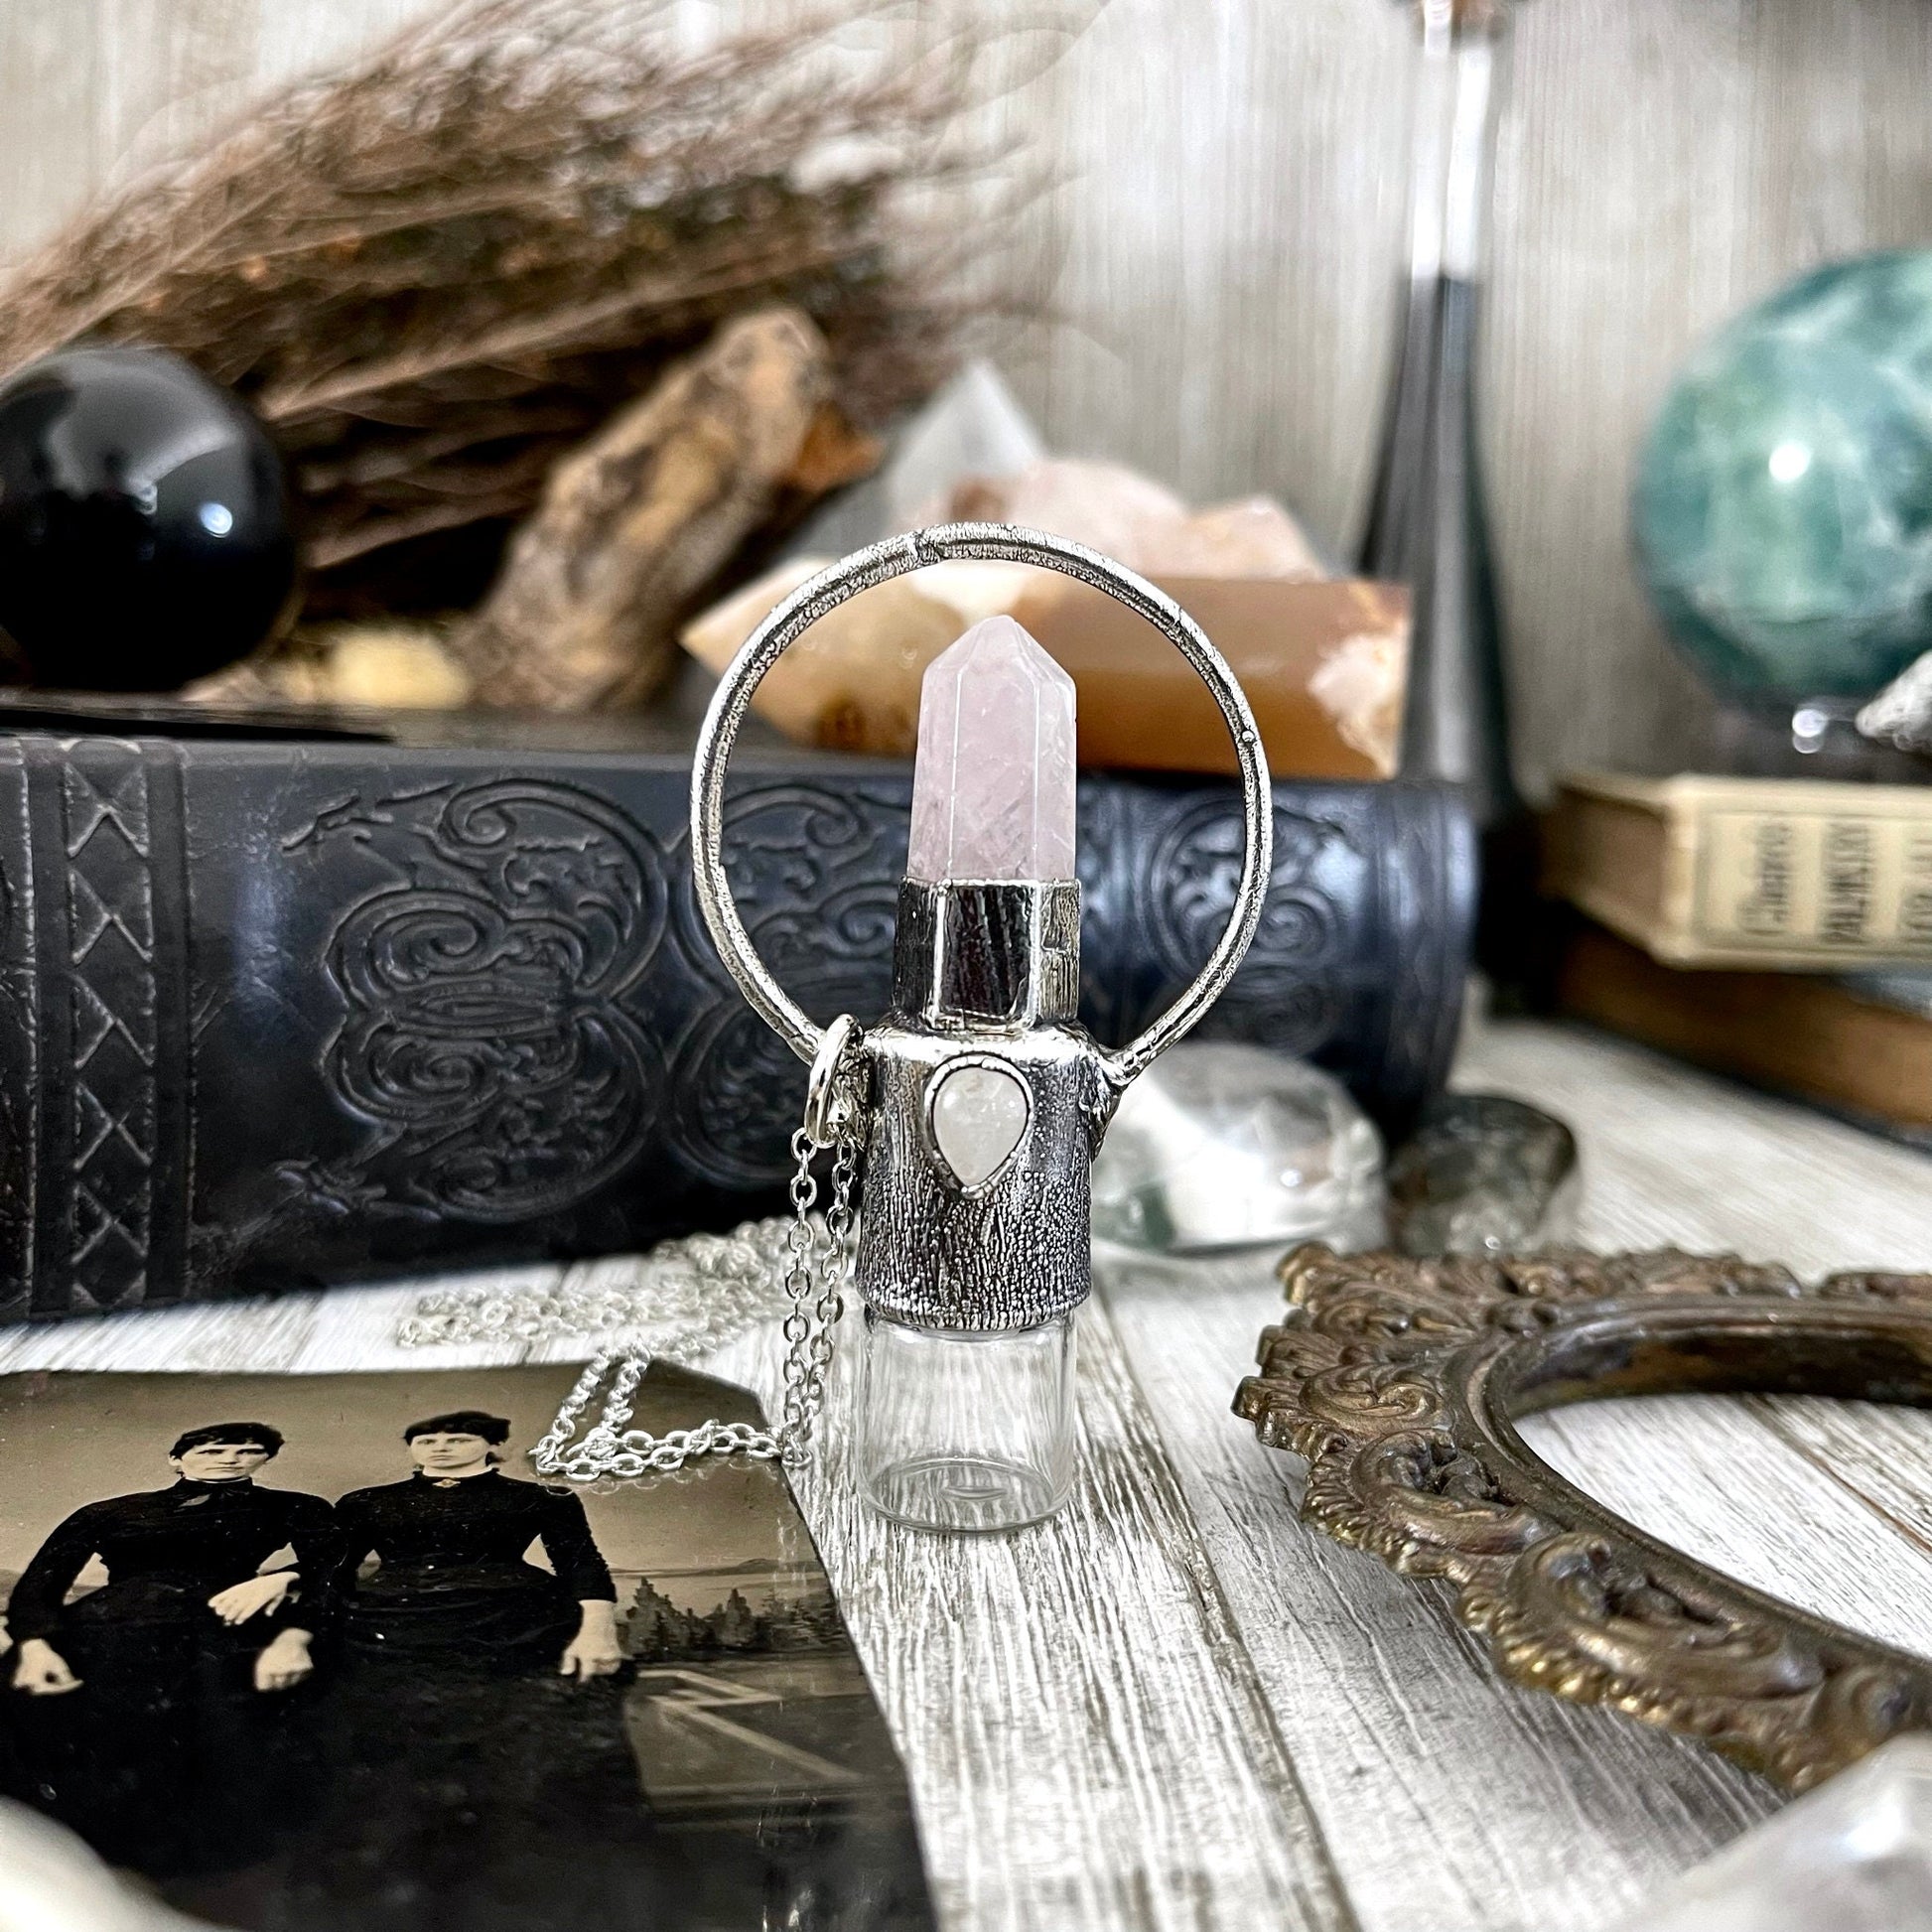 Rose Quartz and Clear Quartz Crystal Necklace / Silver Crystal Rollerball Necklace / Foxlark Collection - One of a Kind / Gothic Jewelry